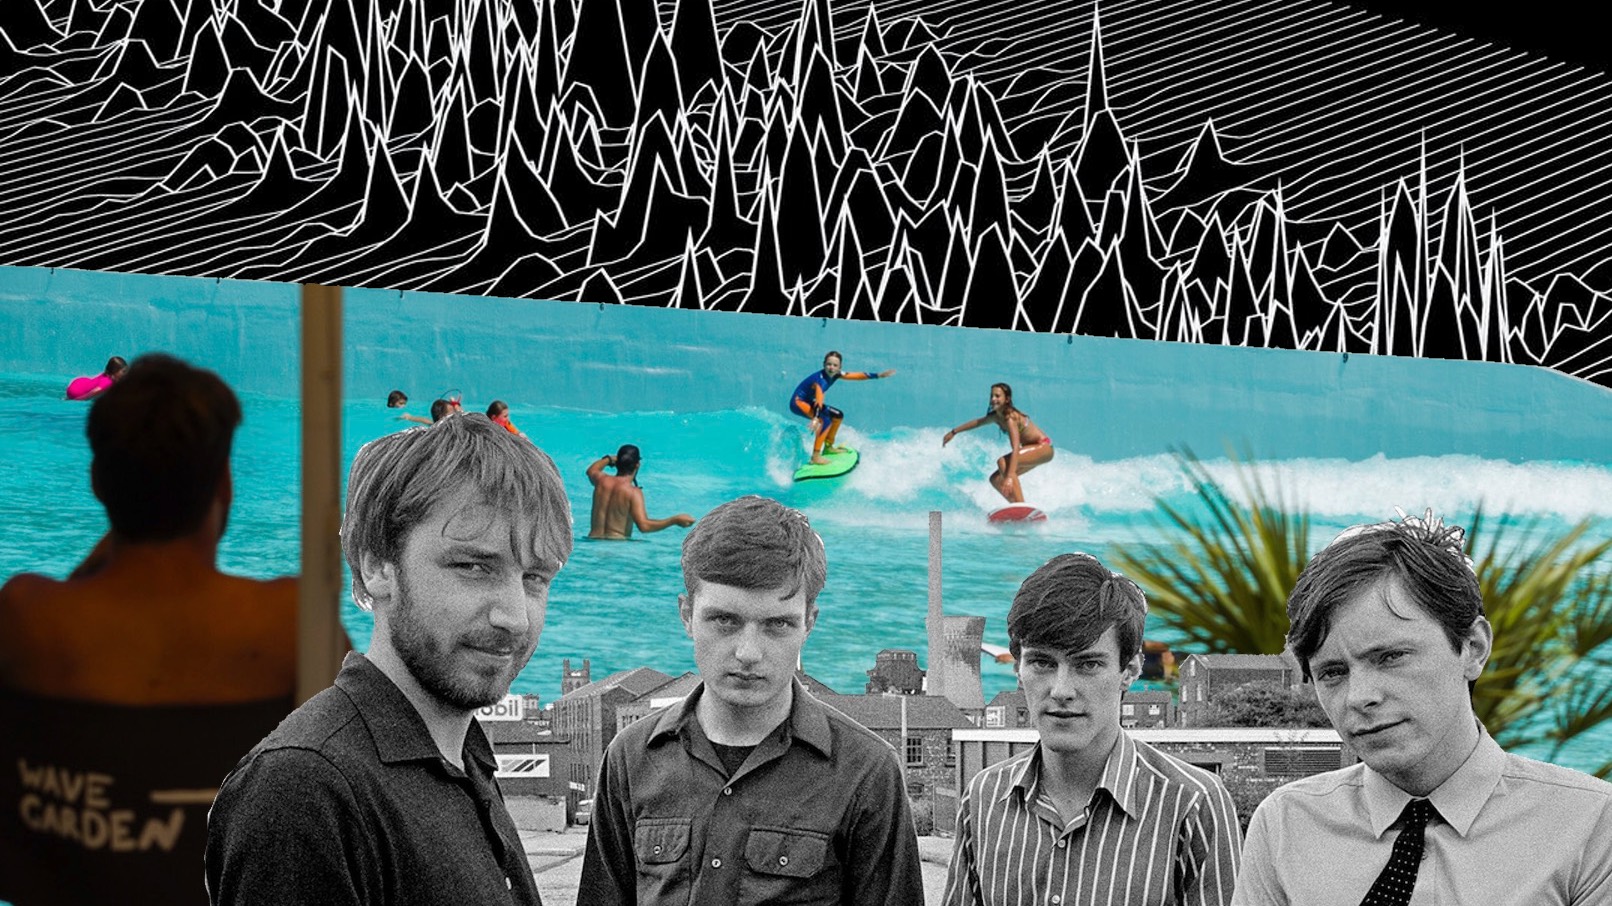 Artist mashup of Joy Division and Wavegarden Cove